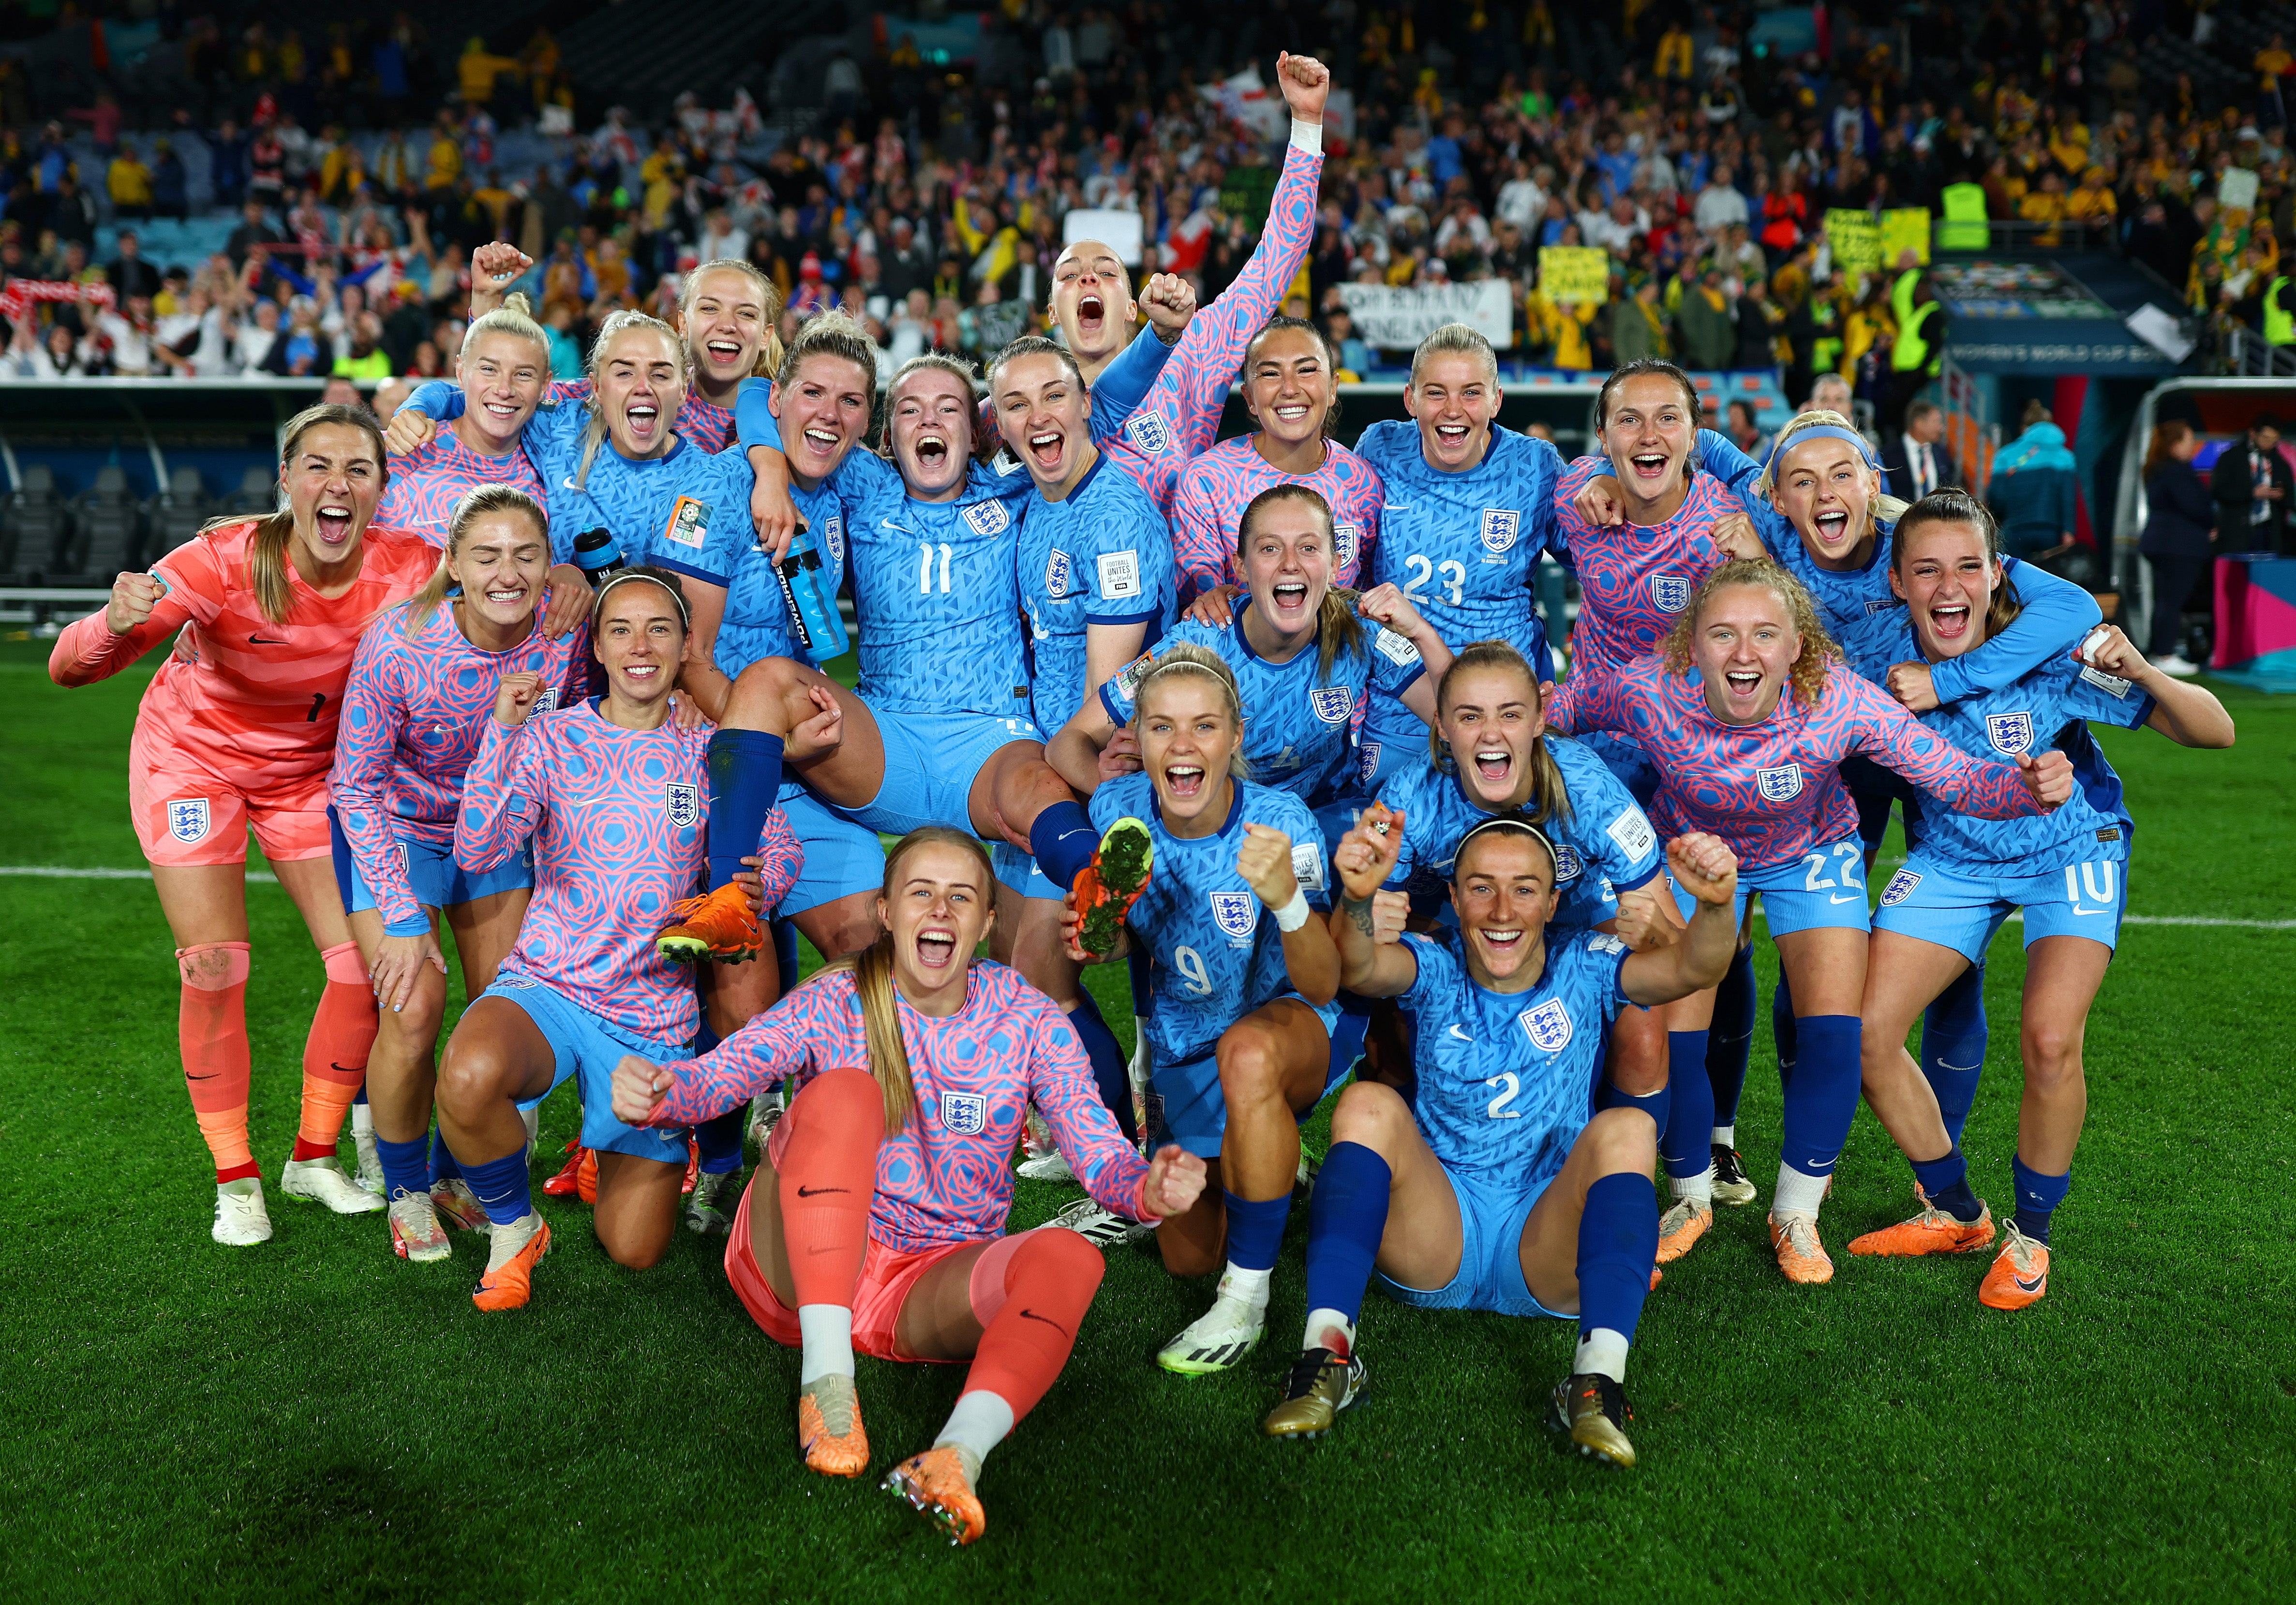 The Lionesses reached the World Cup final this summer and have continued to use their platform